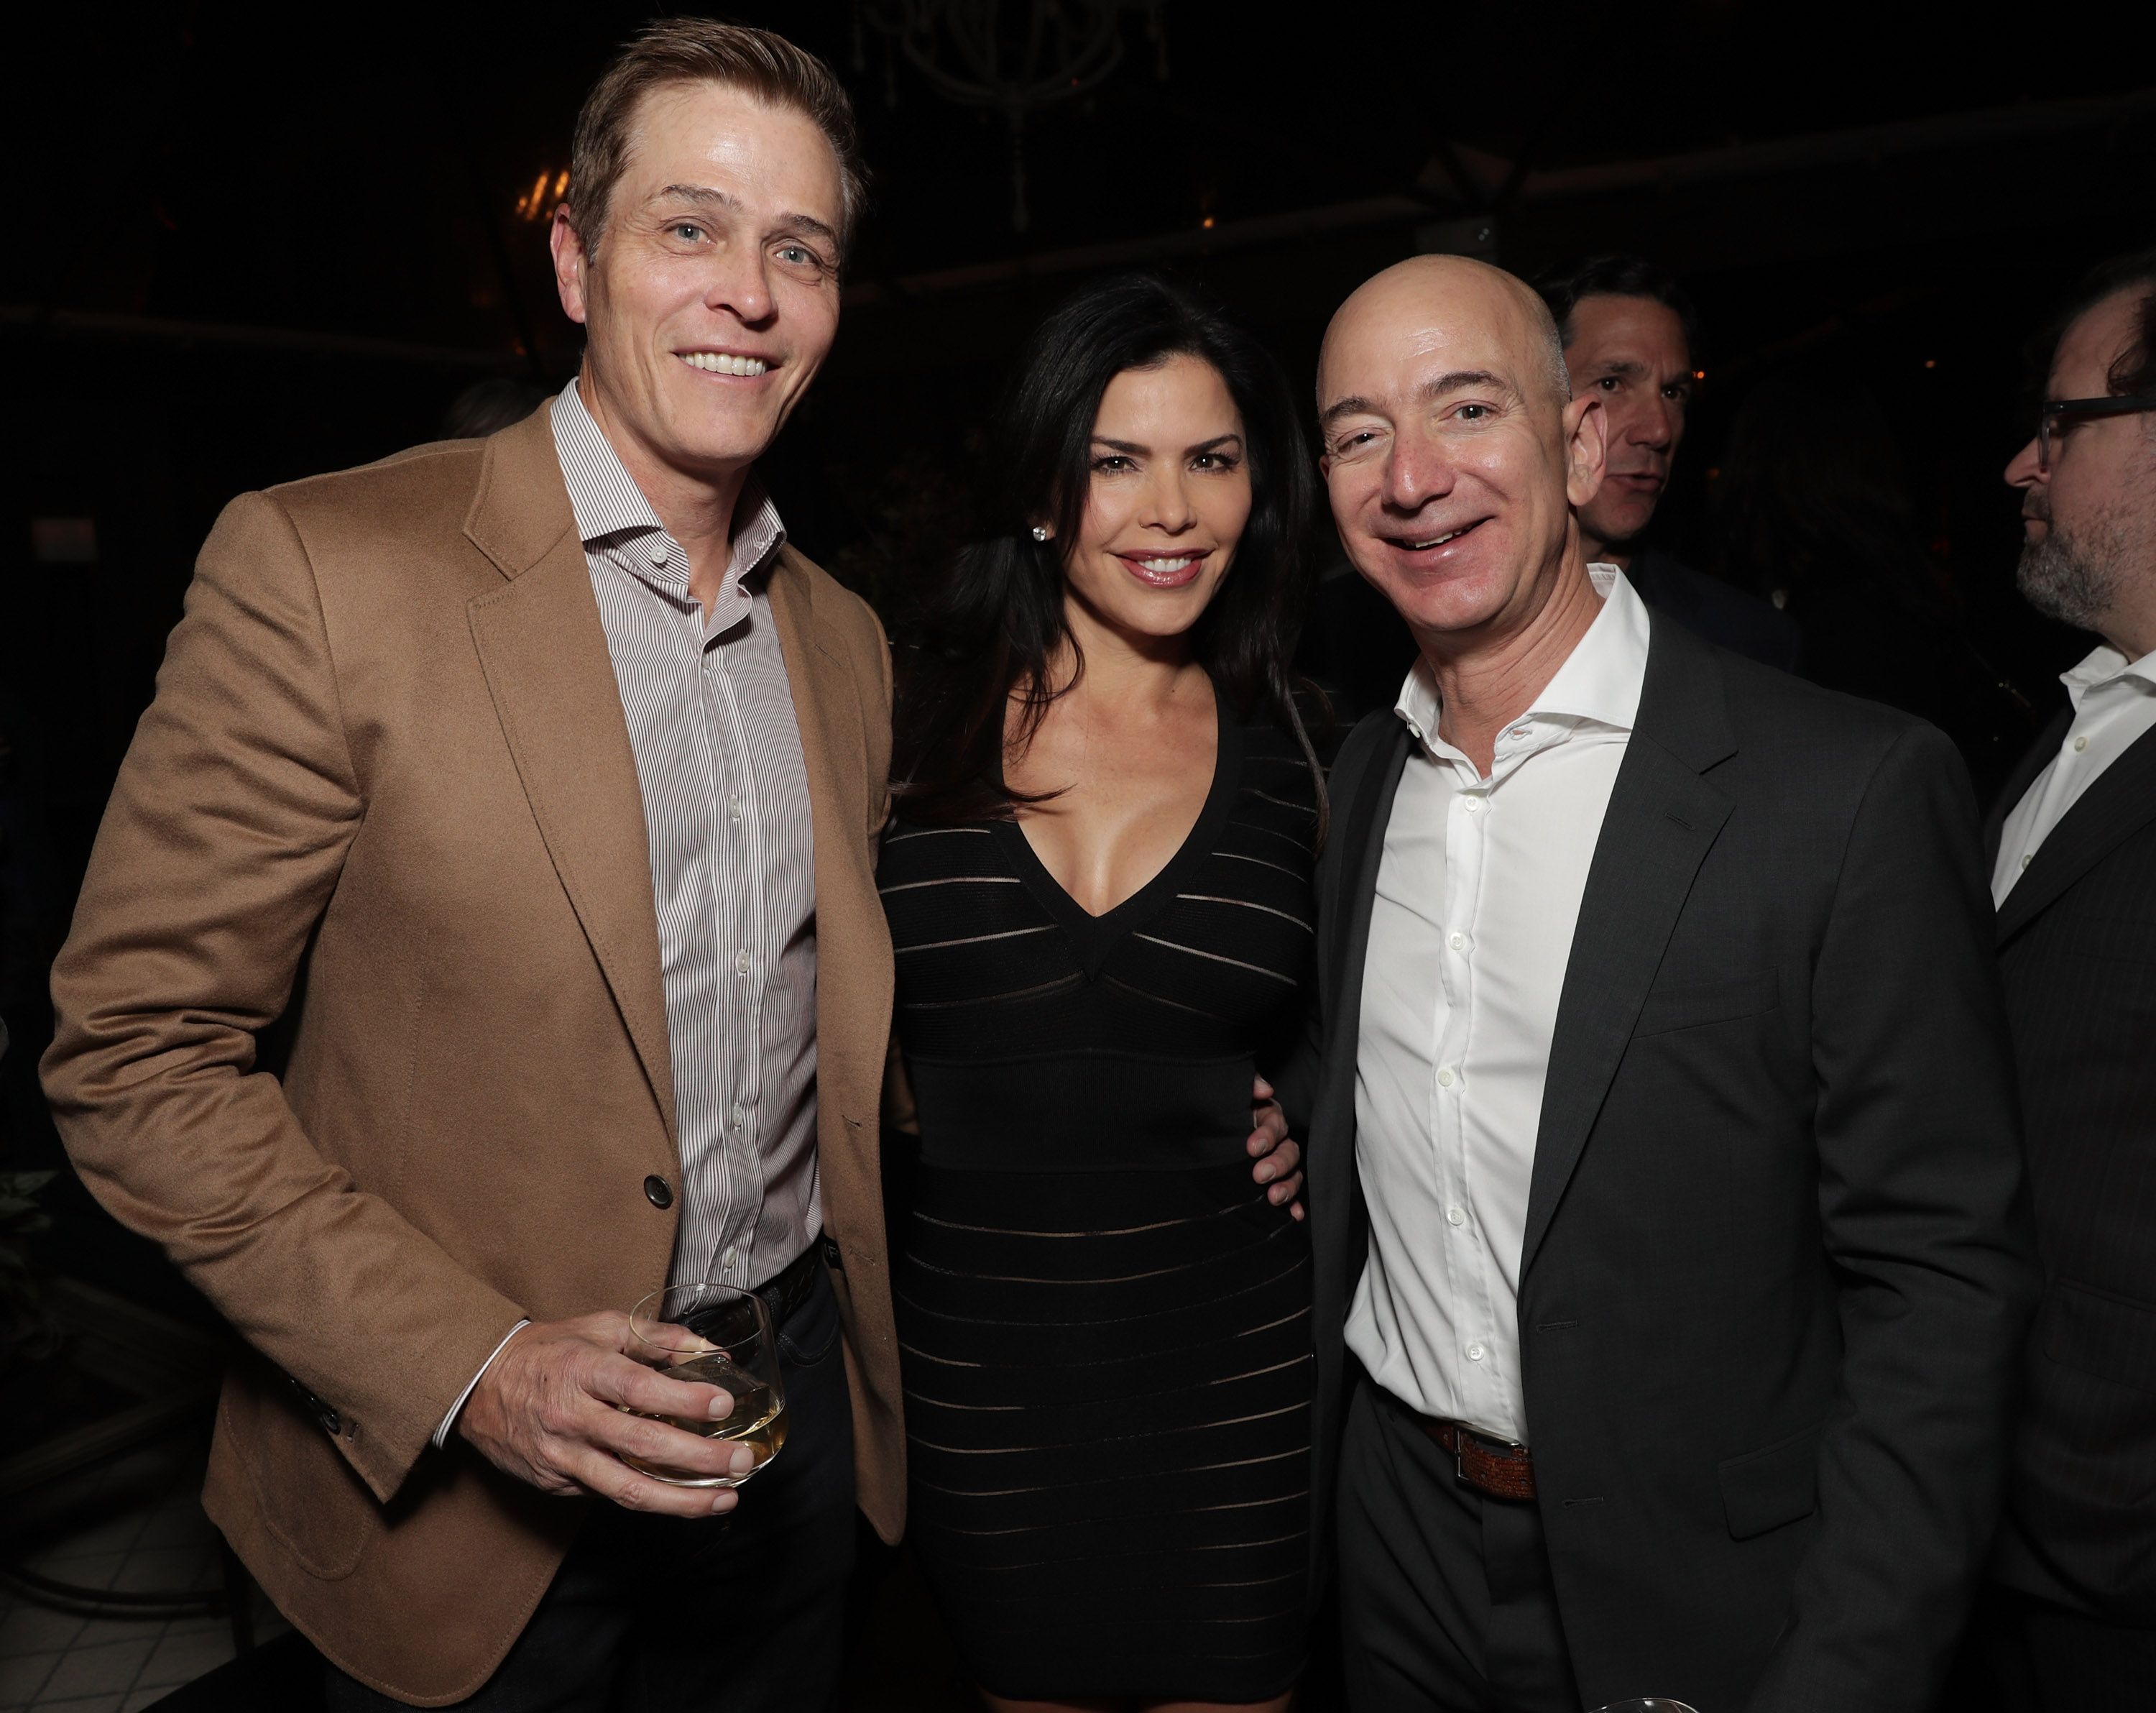 Lauren Sanchez seen with Jeff Bezos in Cabo San Lucas since stepping down  as Amazon CEO - AZNude